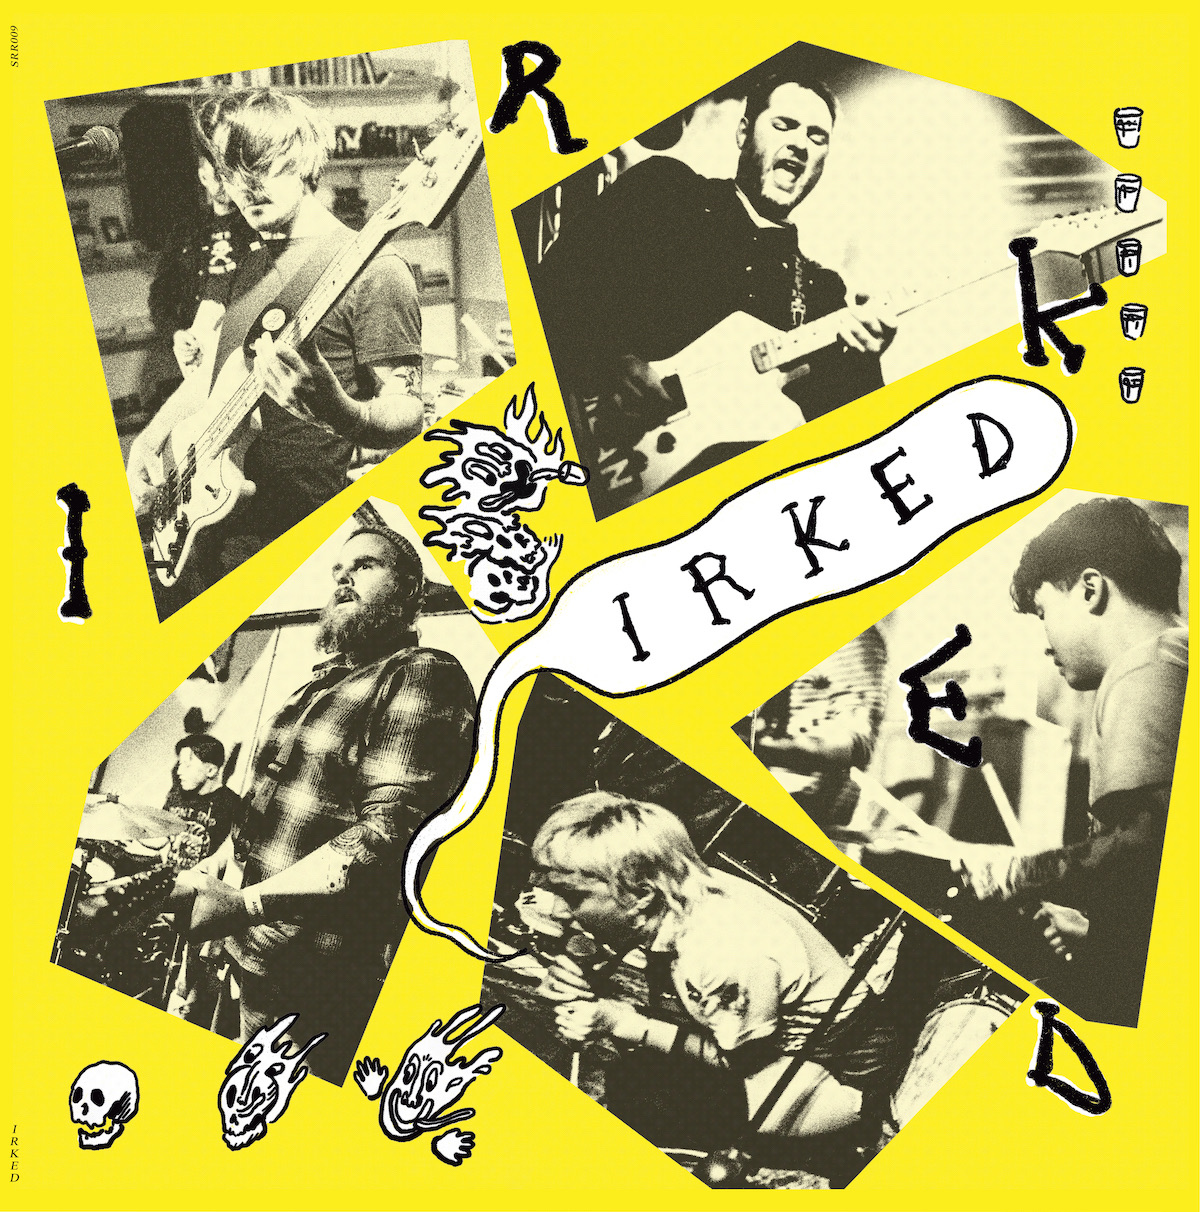 DEBUT EP REVIEW: Irked by Irked